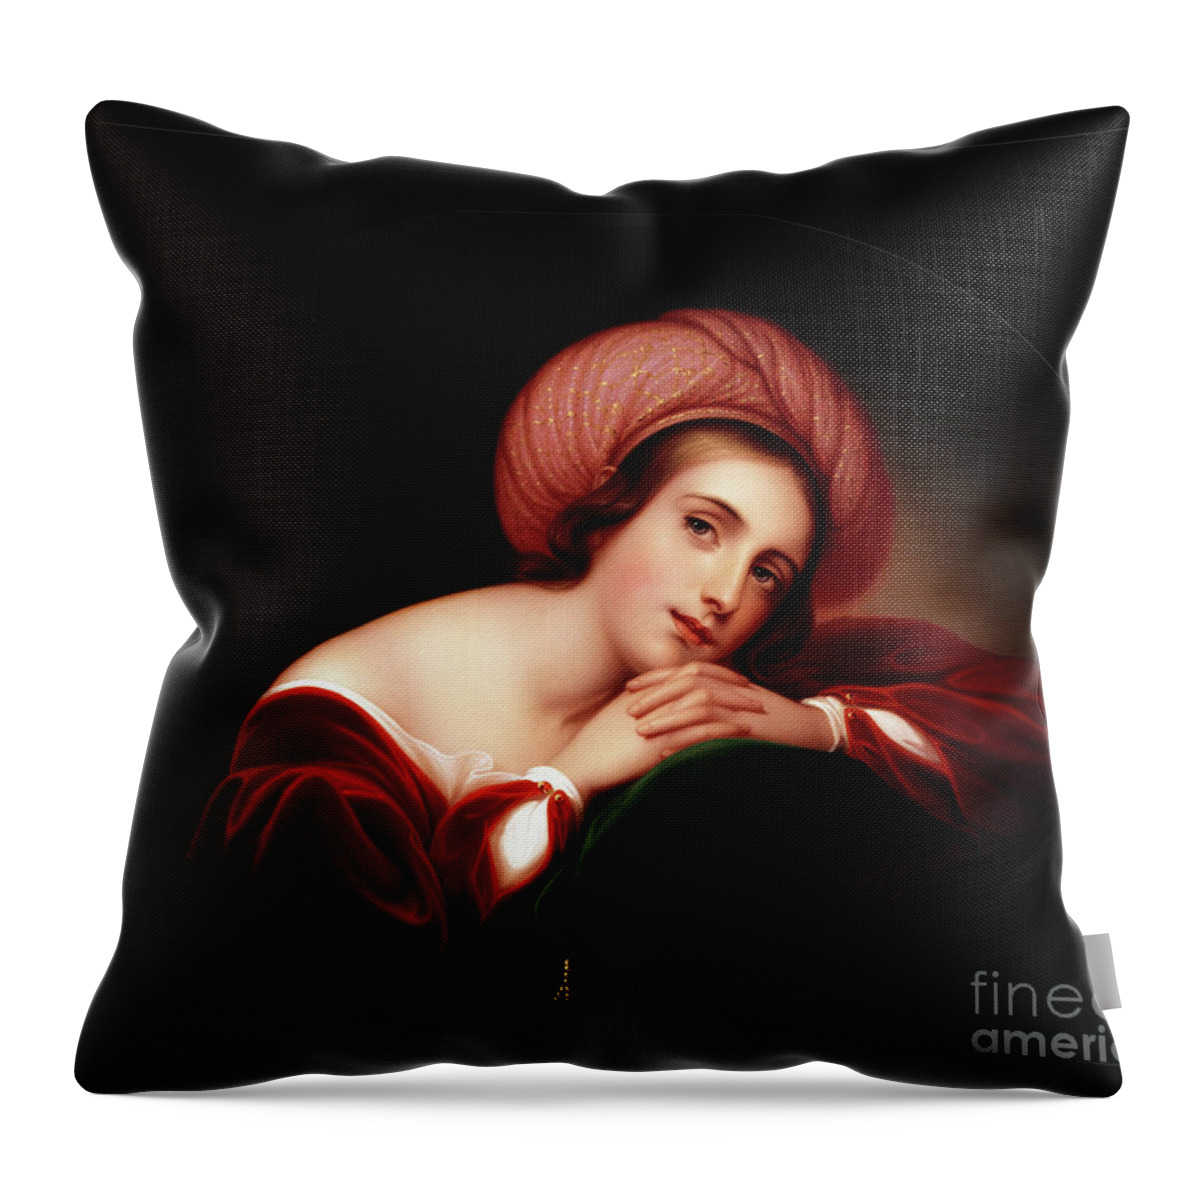 Idealized Portrait Throw Pillow featuring the painting Idealized Portrait by Rembrandt Peale Old Masters Classical Art Reproduction by Rolando Burbon